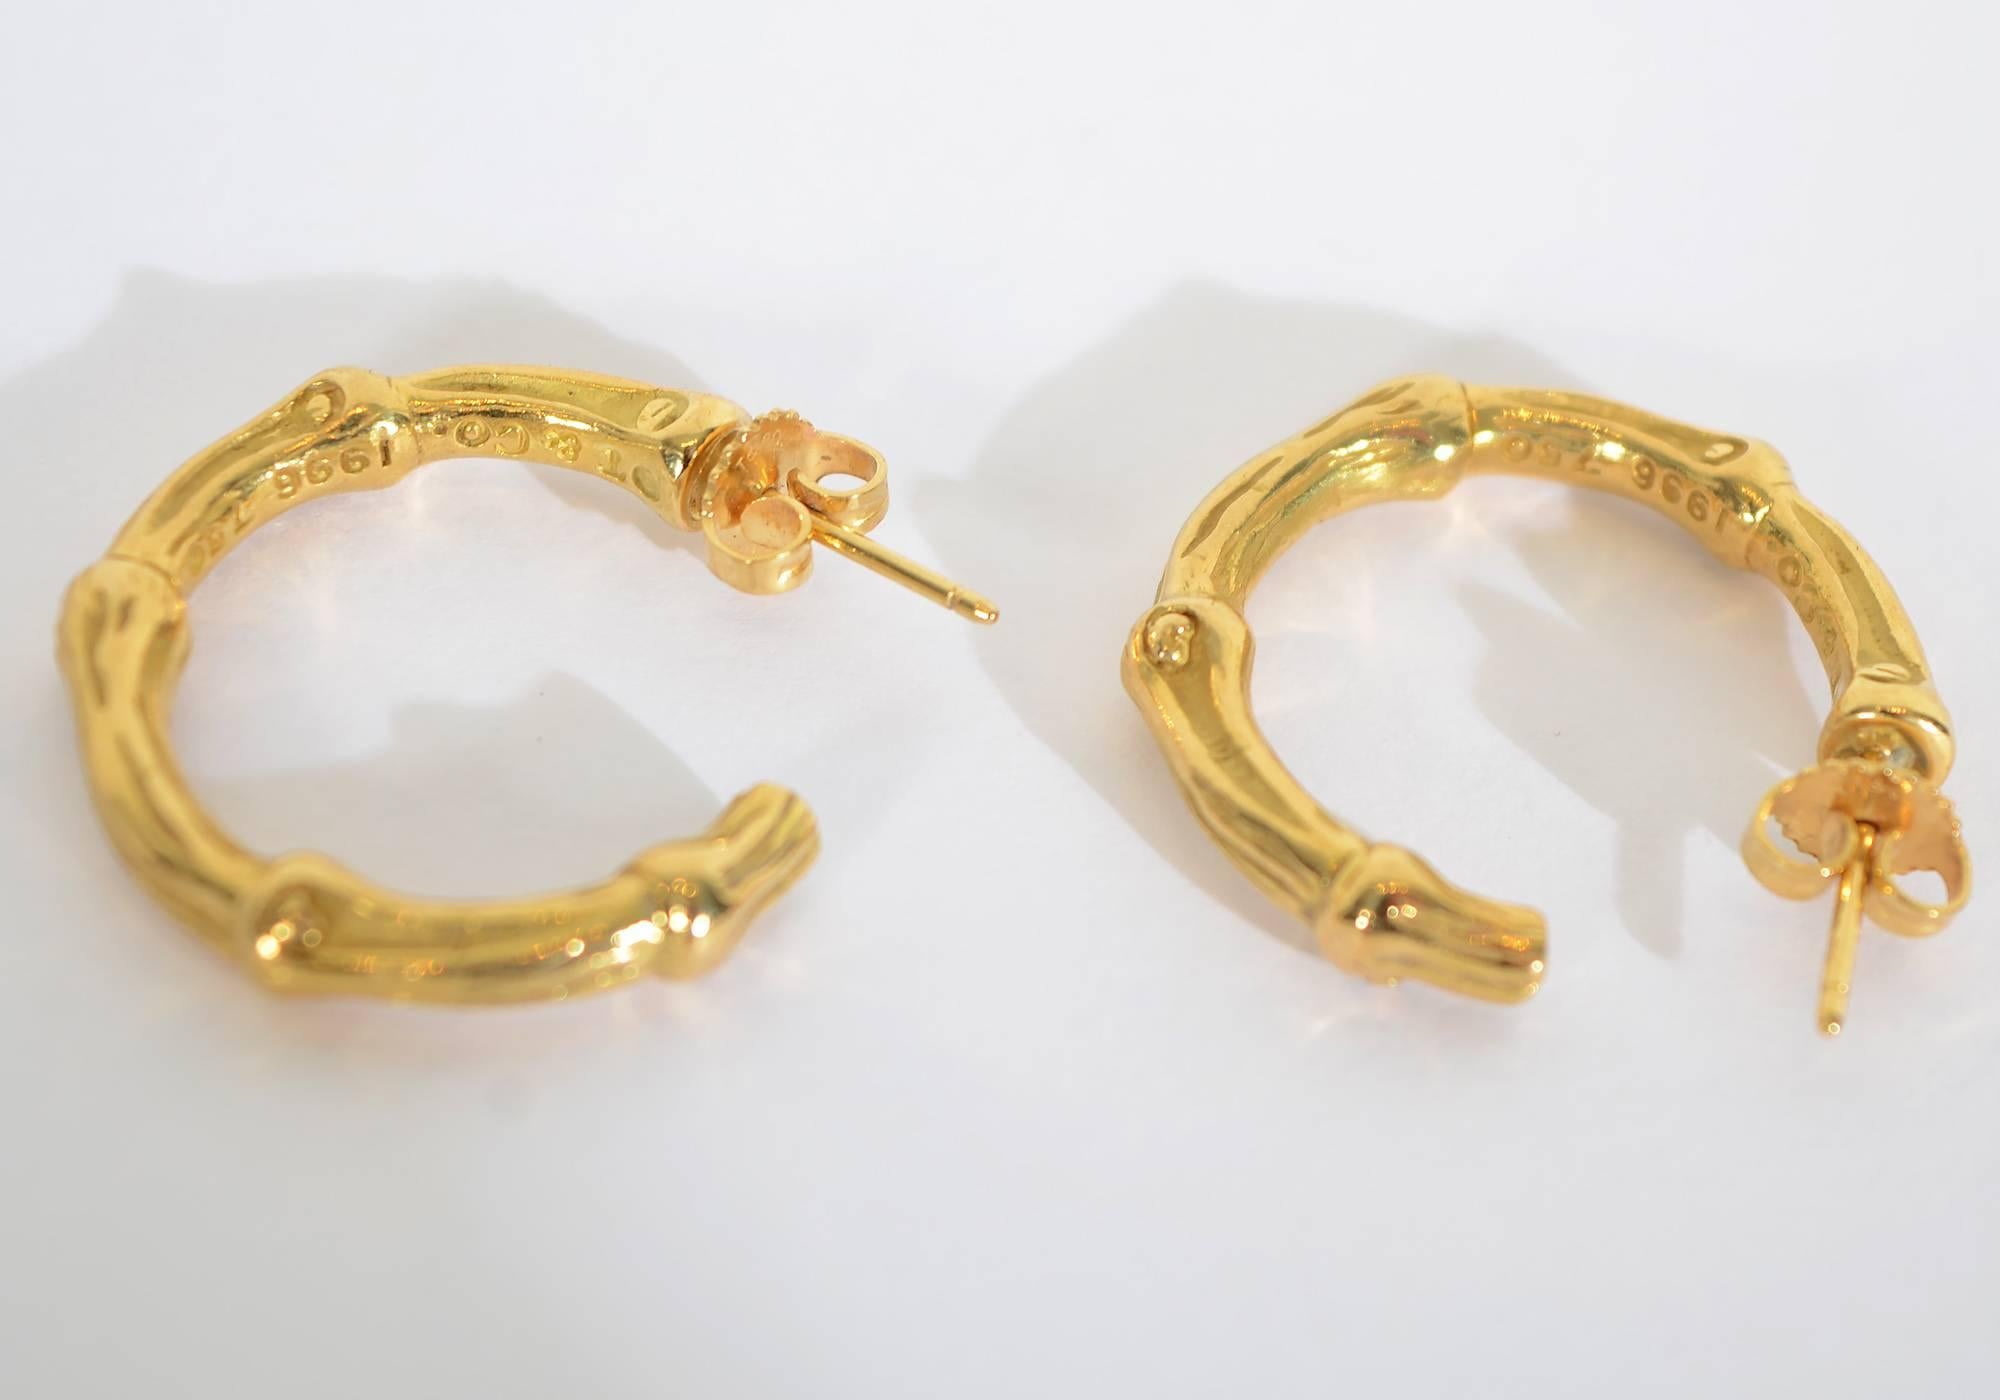 The bamboo style hoop earrings by Tiffany are the perfect everyday earrings. The nice texturing makes them more interesting than standard hoops. Nice weight makes them feel solid without being too heavy to be comfortable. Made of 18 karat gold. They